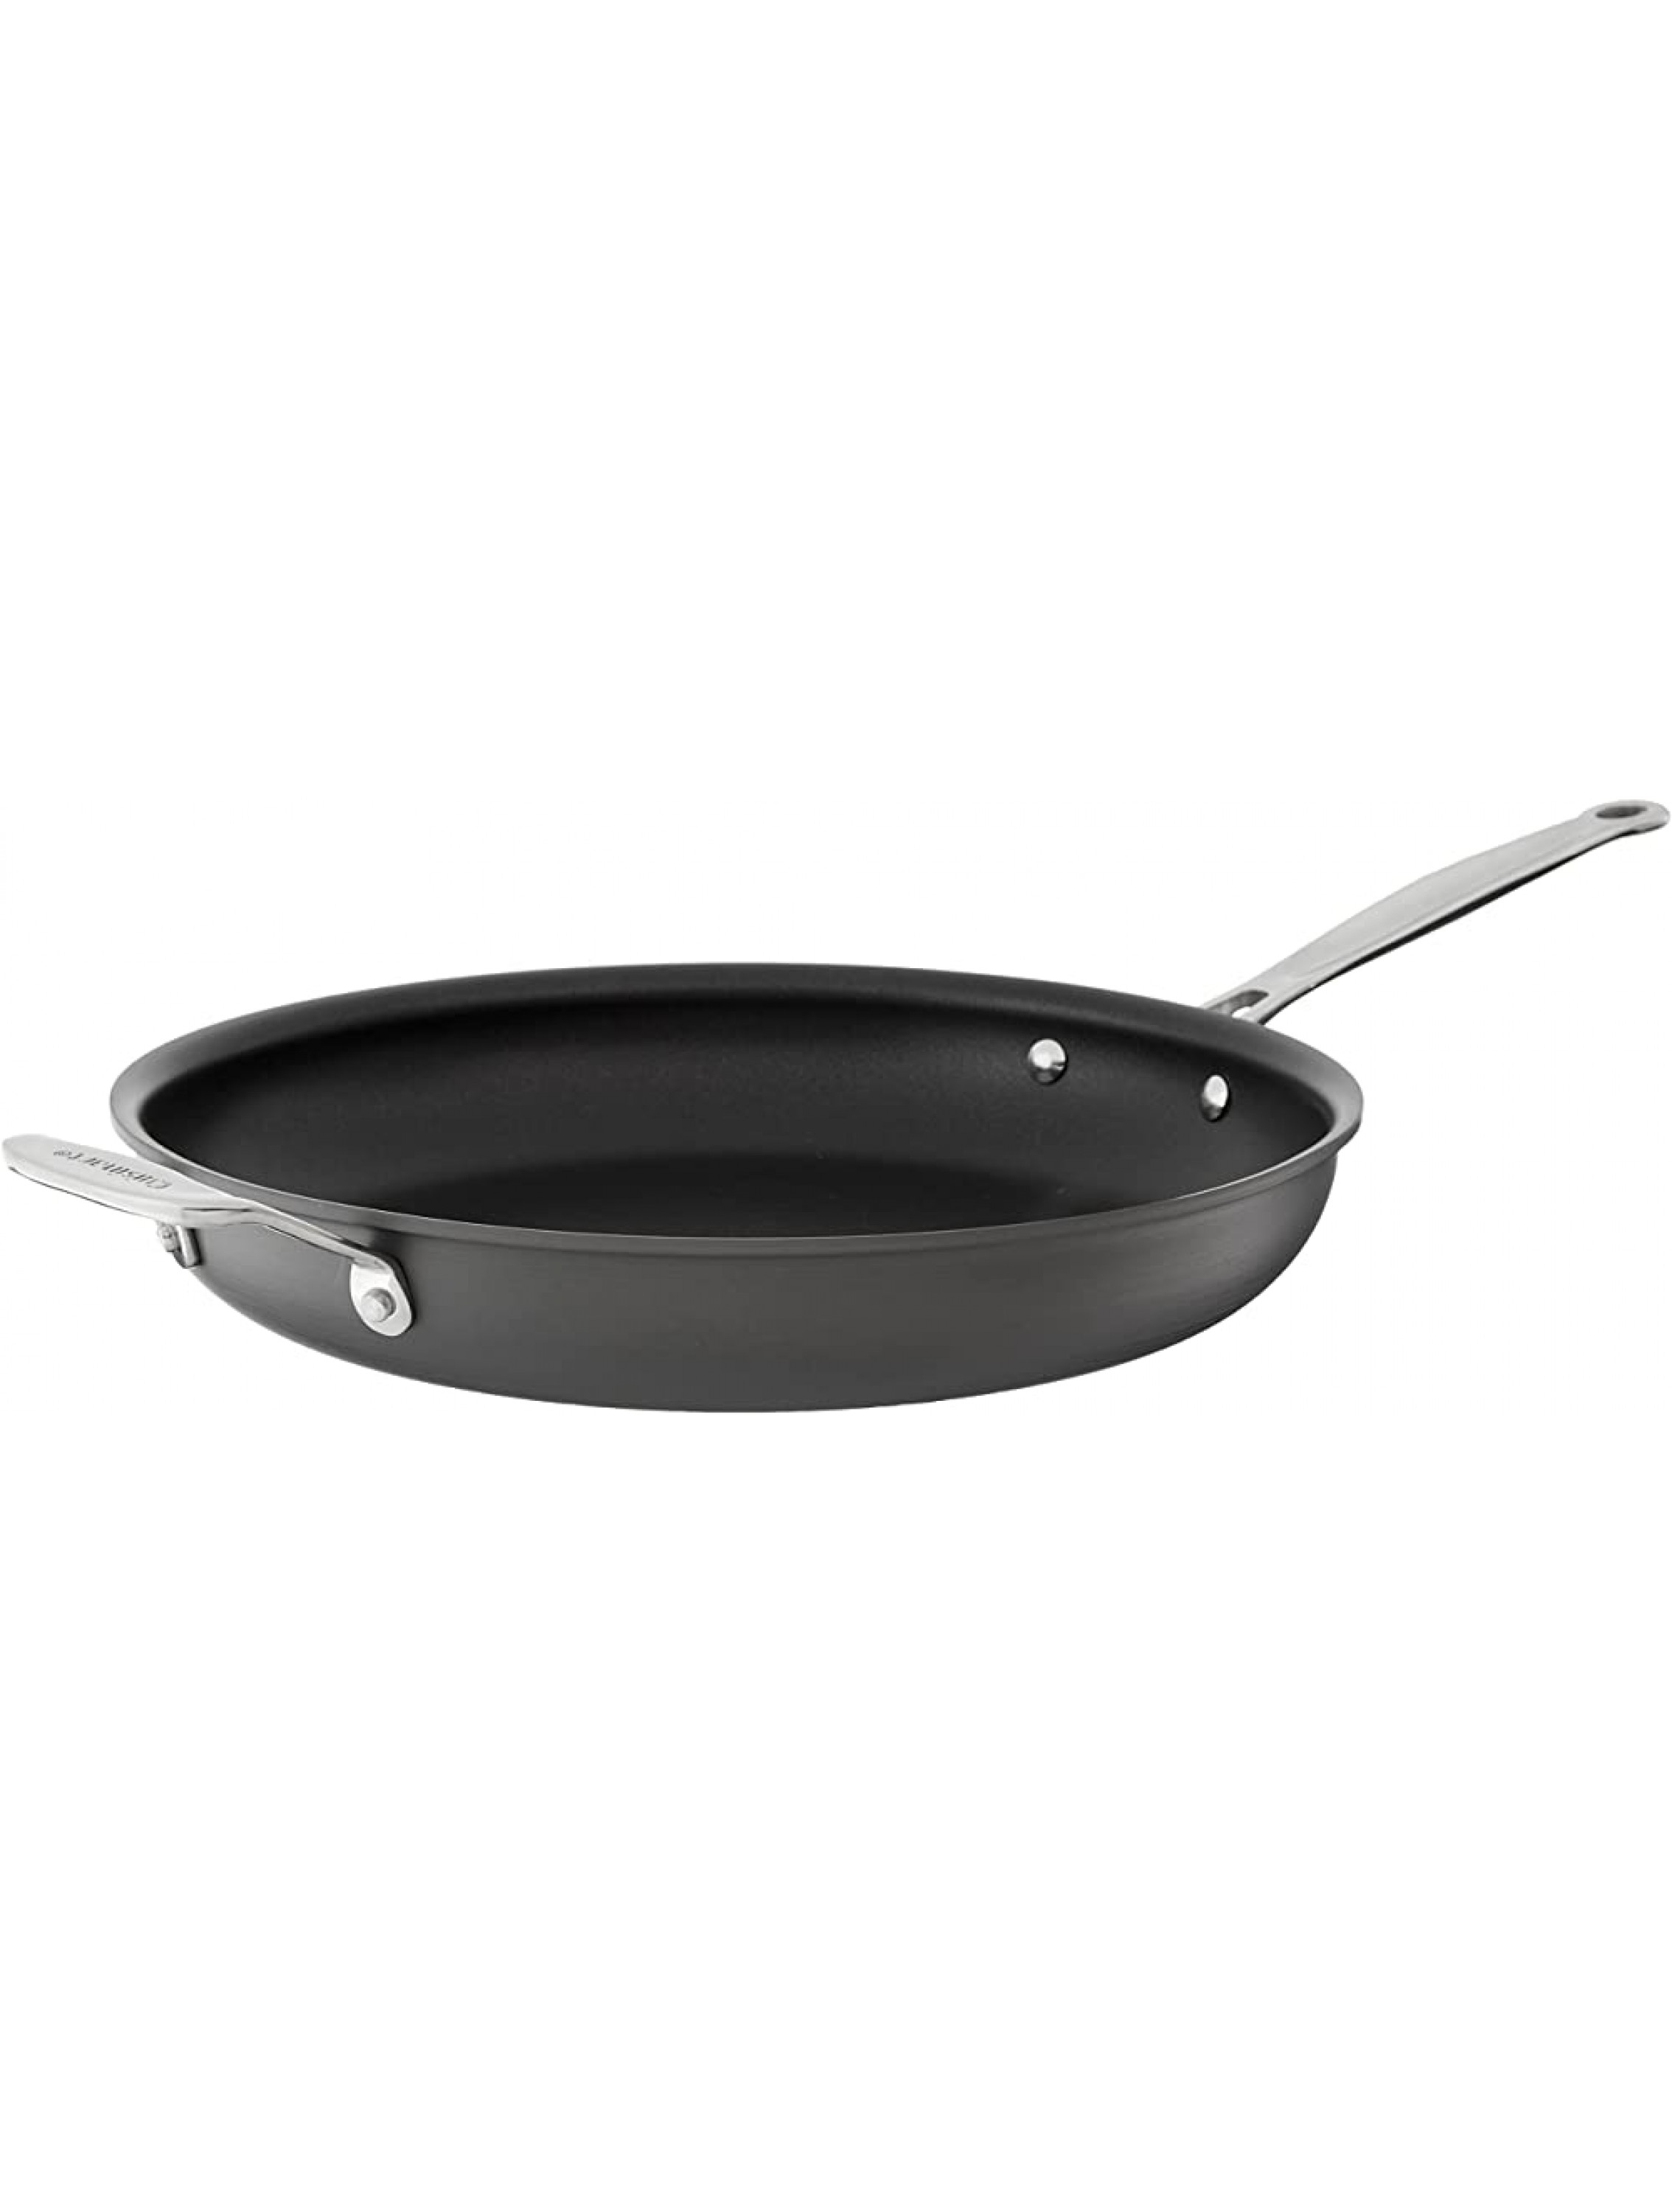 Cuisinart Chef's Classic Nonstick Hard-Anodized 12-Inch Open Skillet with Helper Handle Black - B0ZJHXQCP